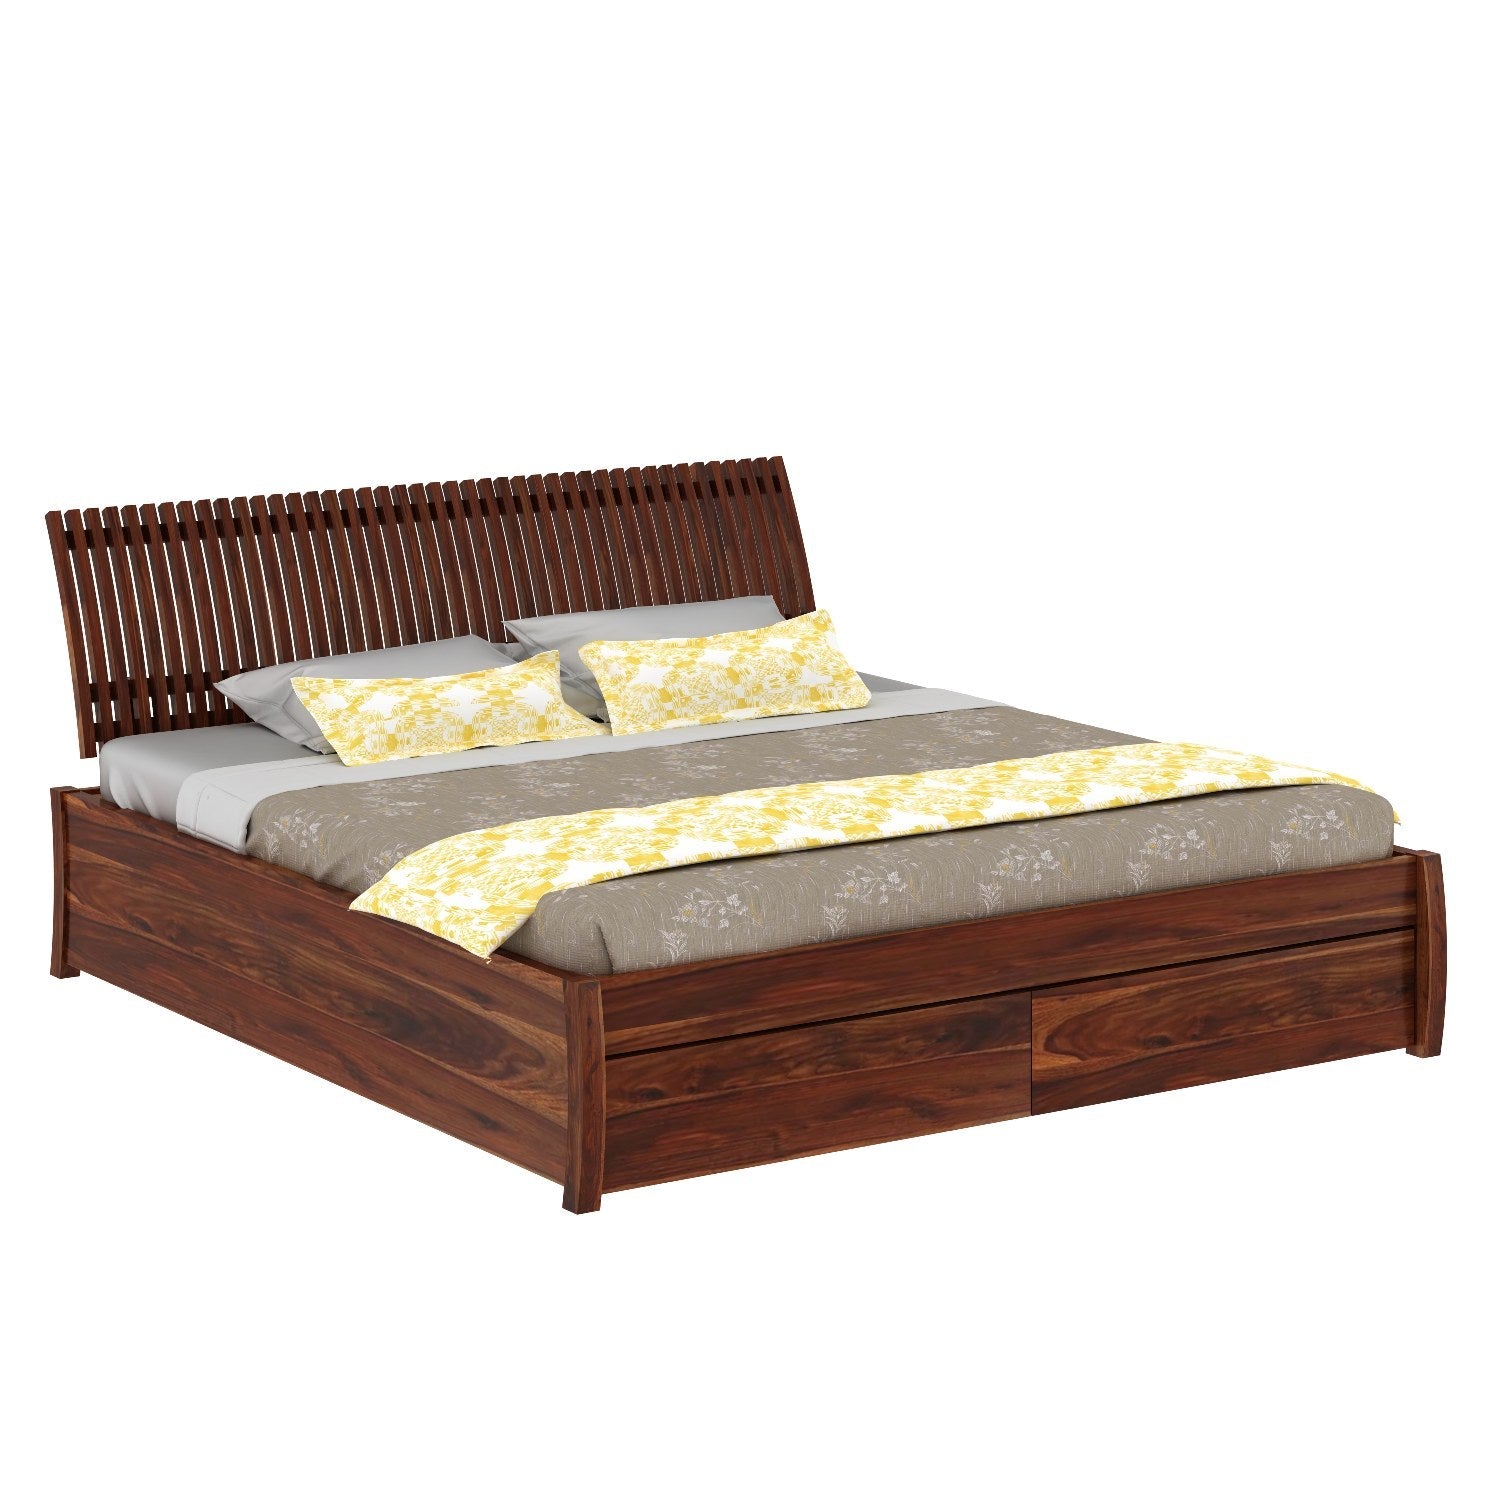 Dumdum Solid Sheesham Wood Bed With Two Drawers (Queen Size, Natural Finish)